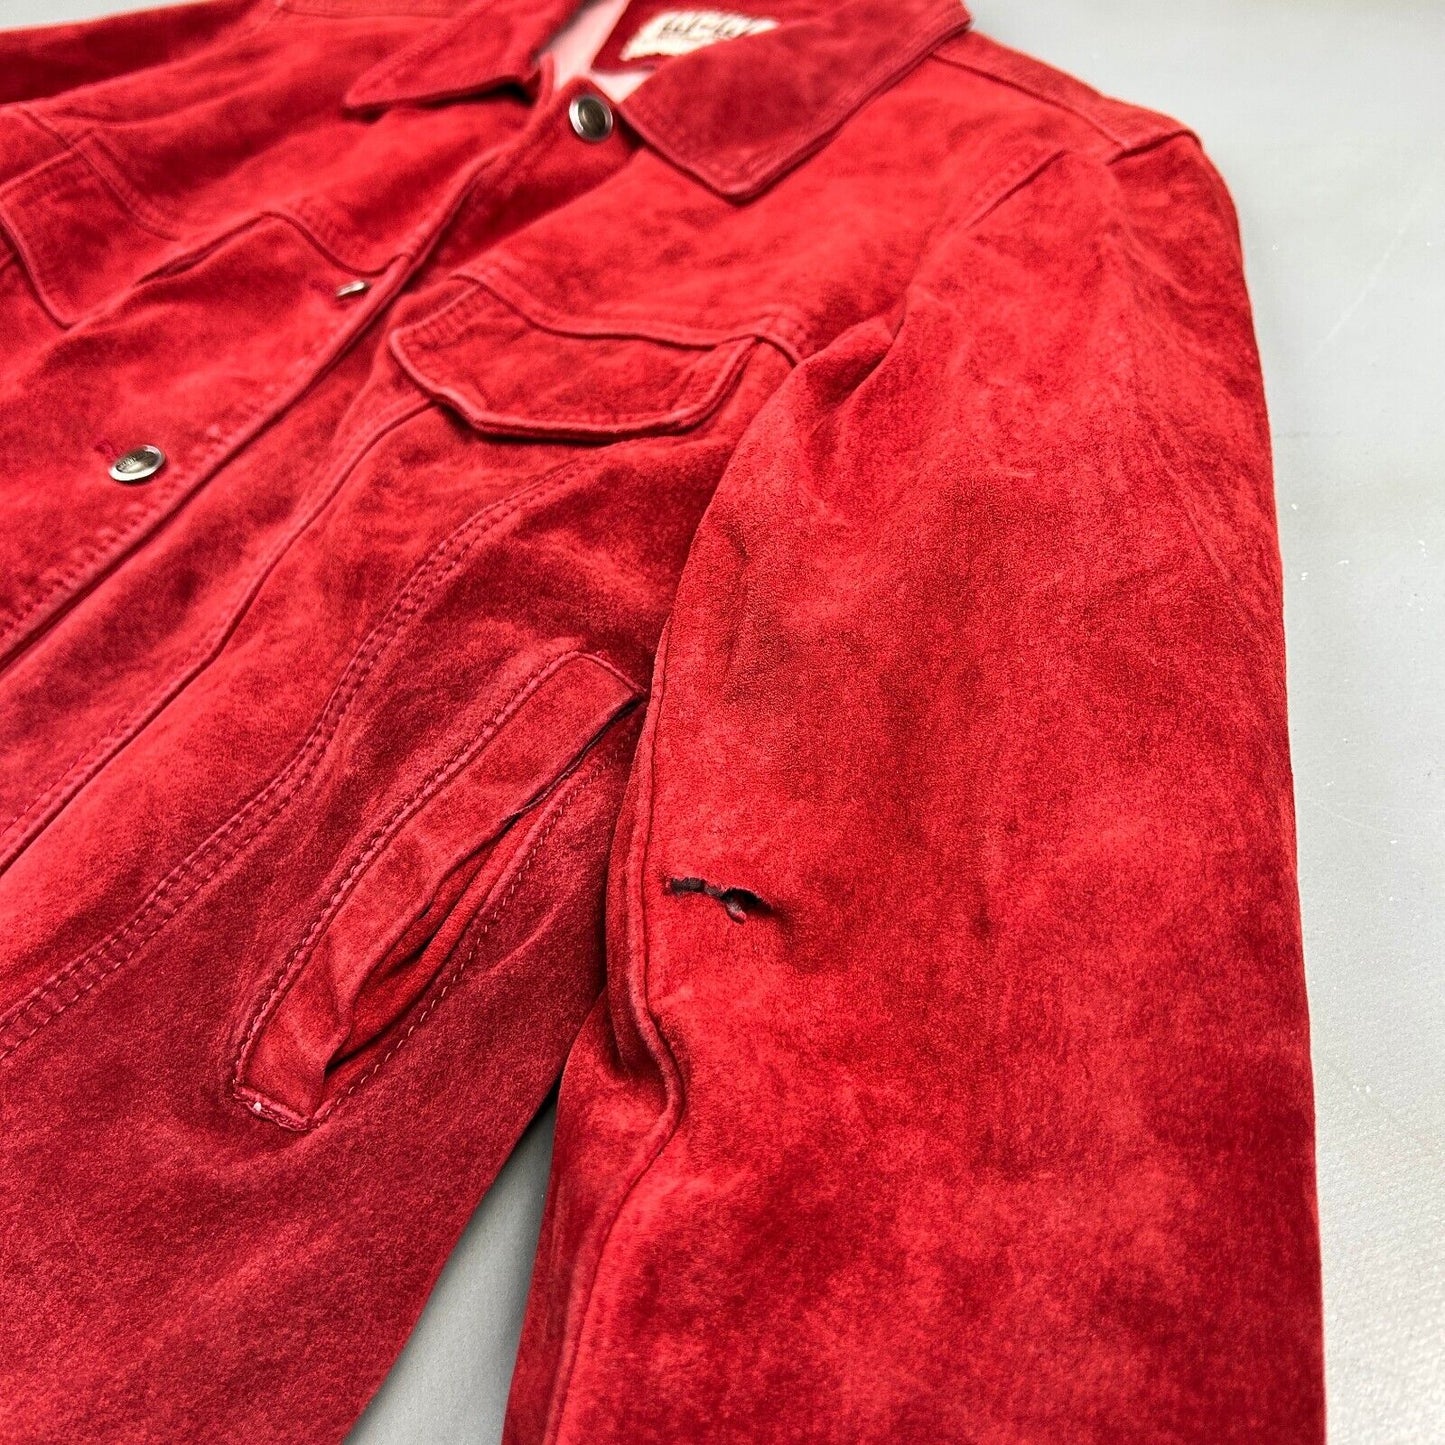 VINTAGE | W2W Over Dyed Red Suede Trucker Jacket sz S-M Adult